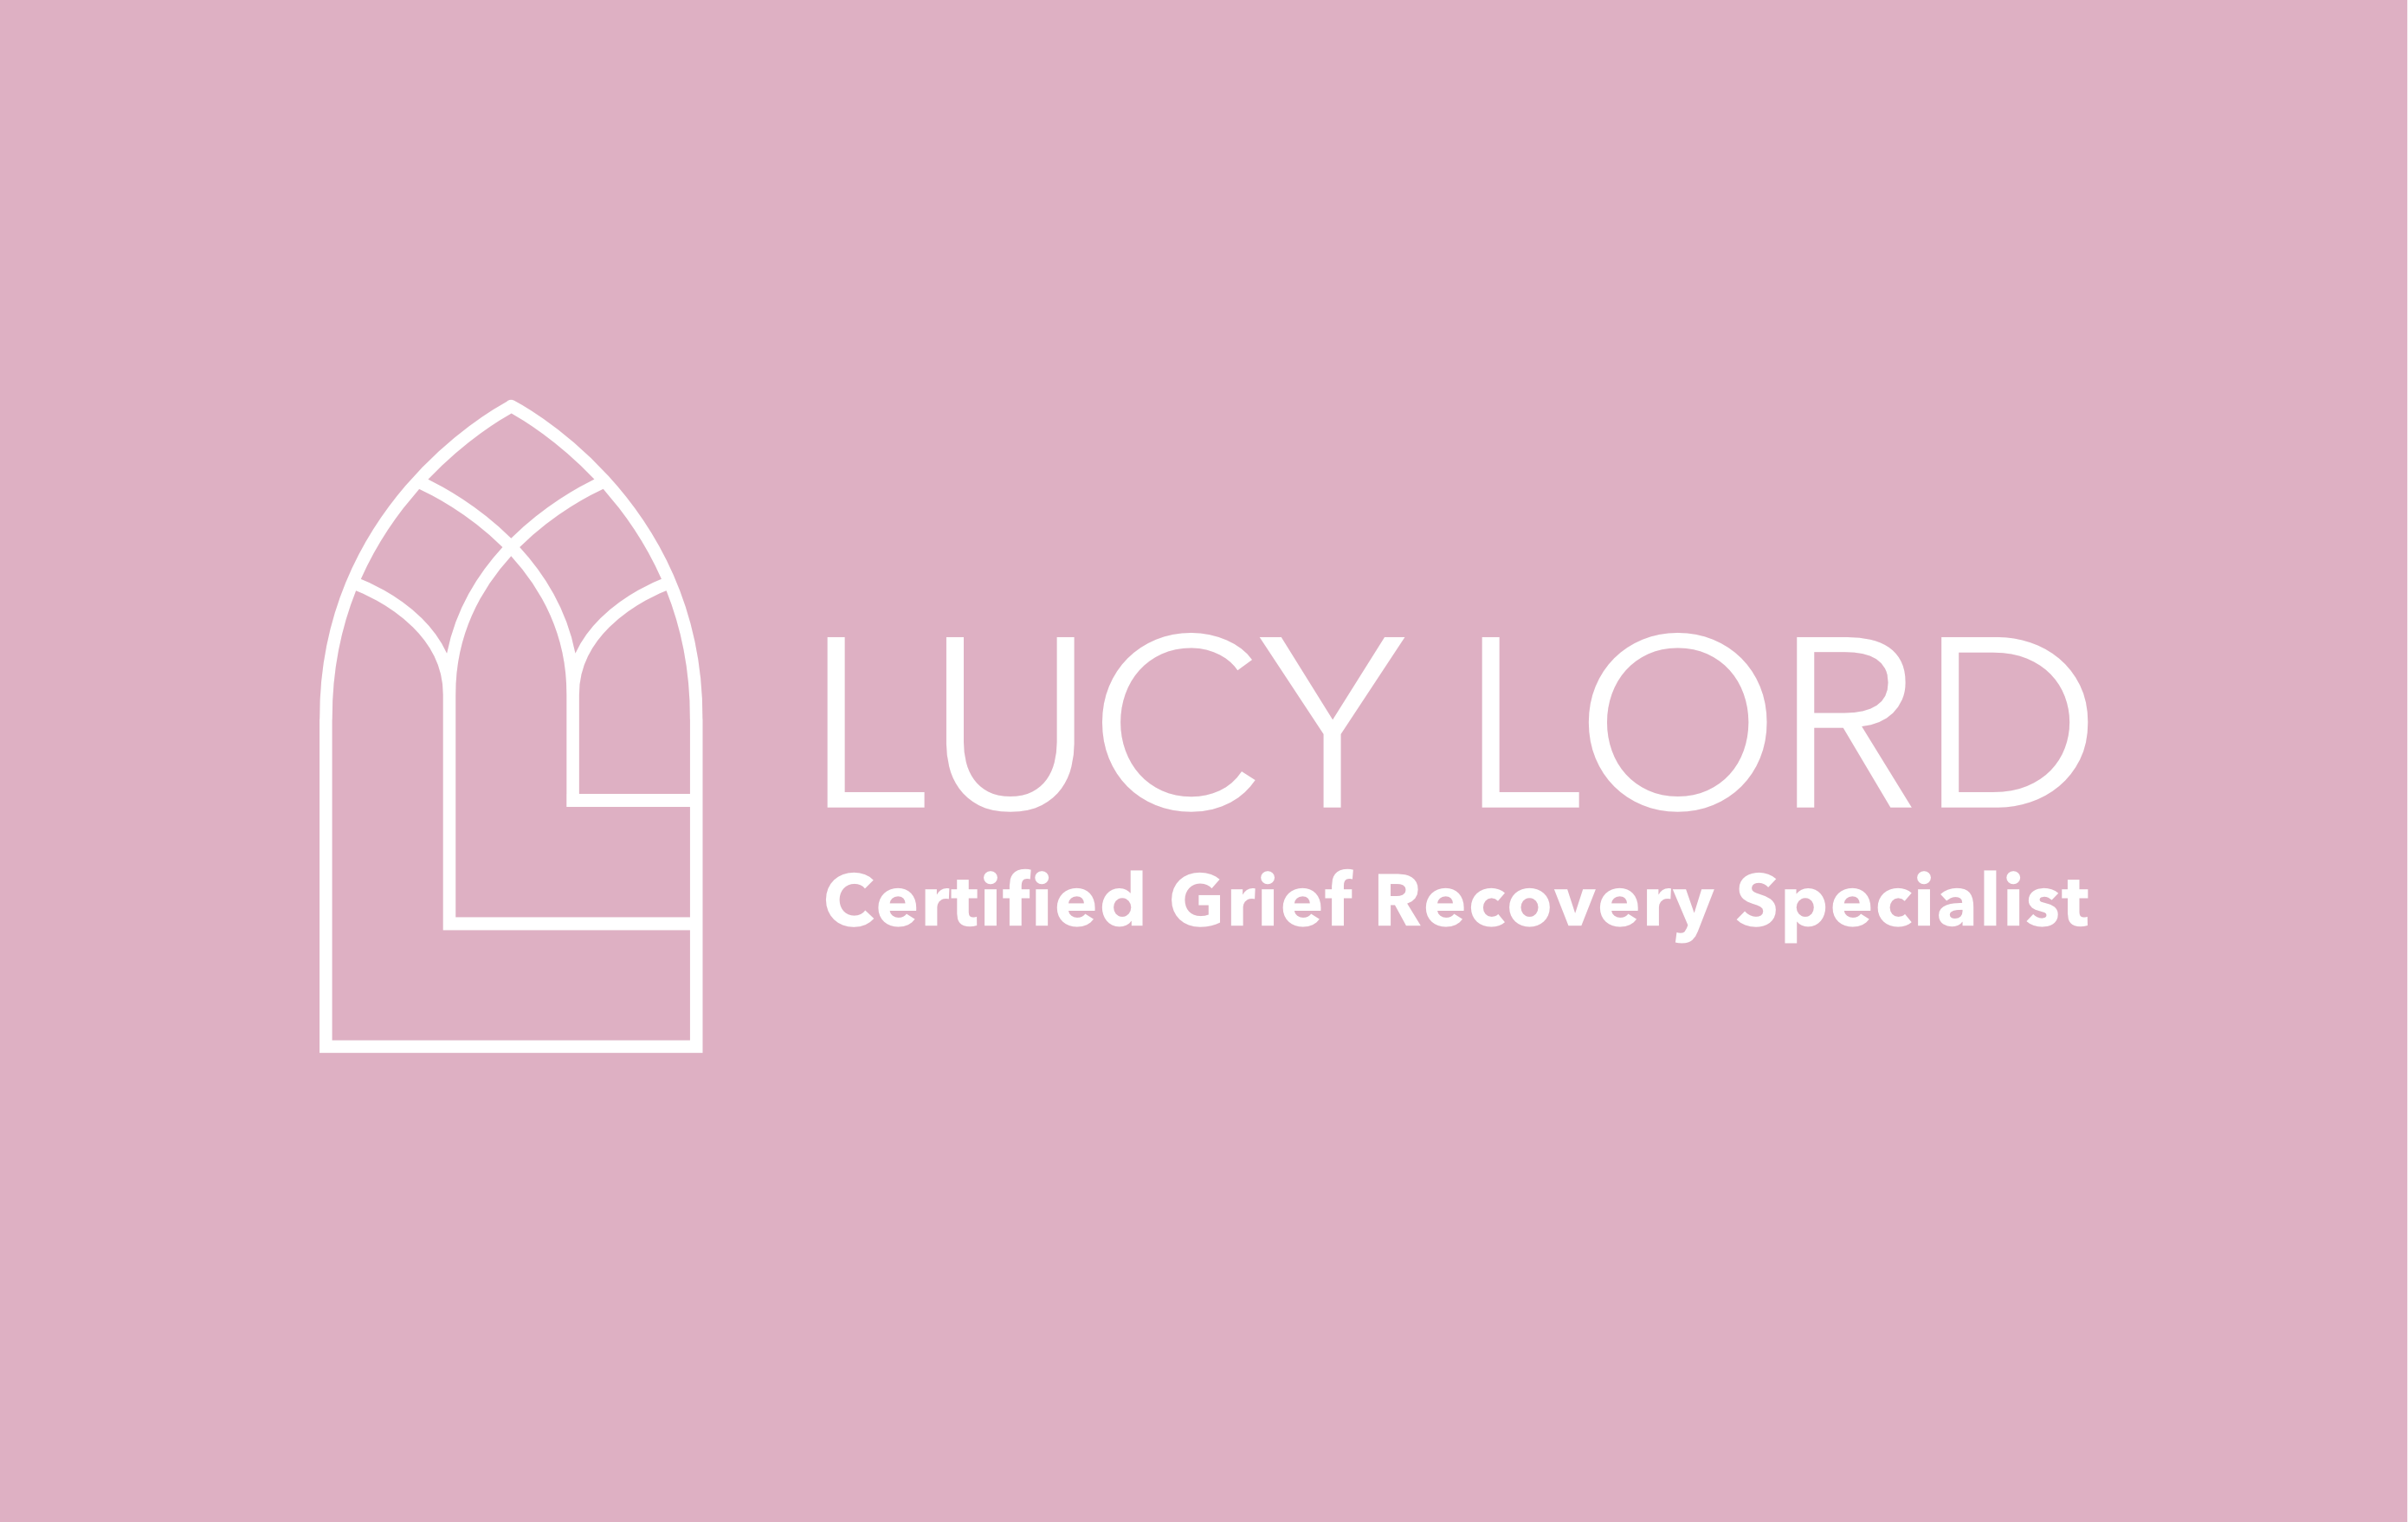 Lucy Lord Grief Recovery Specialist